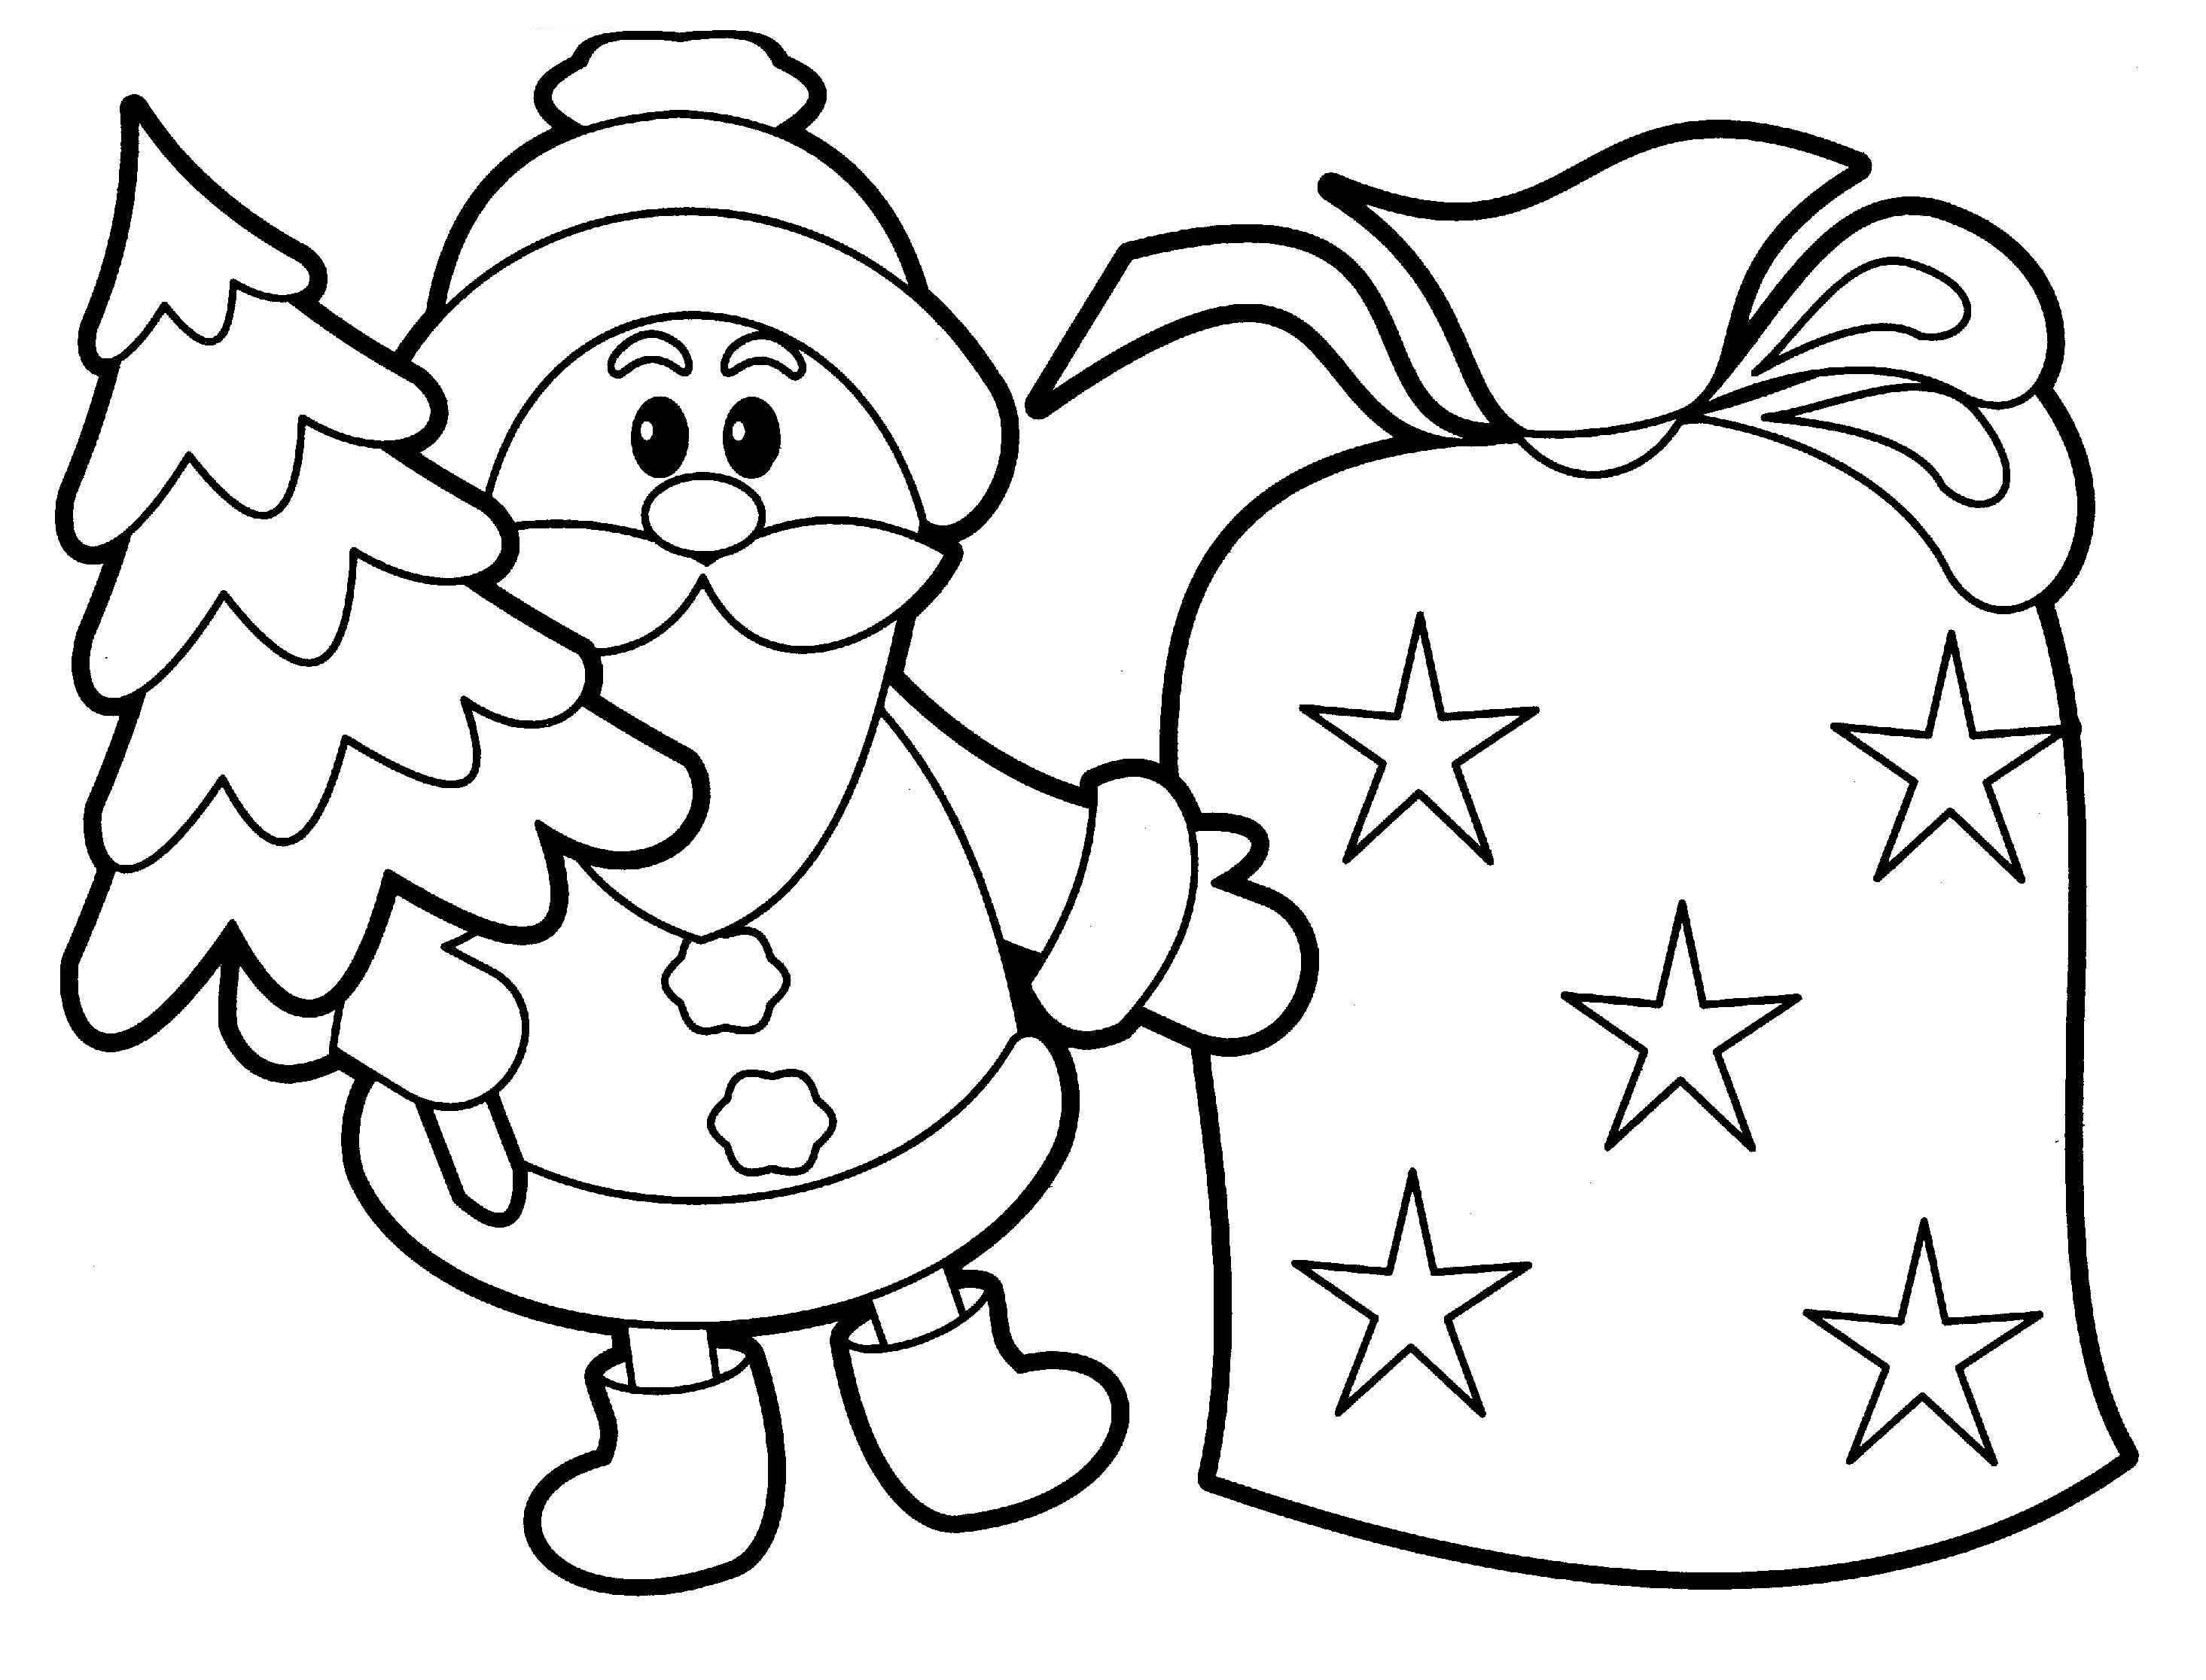 Christmas Coloring Pages For Toddlers - Coloring